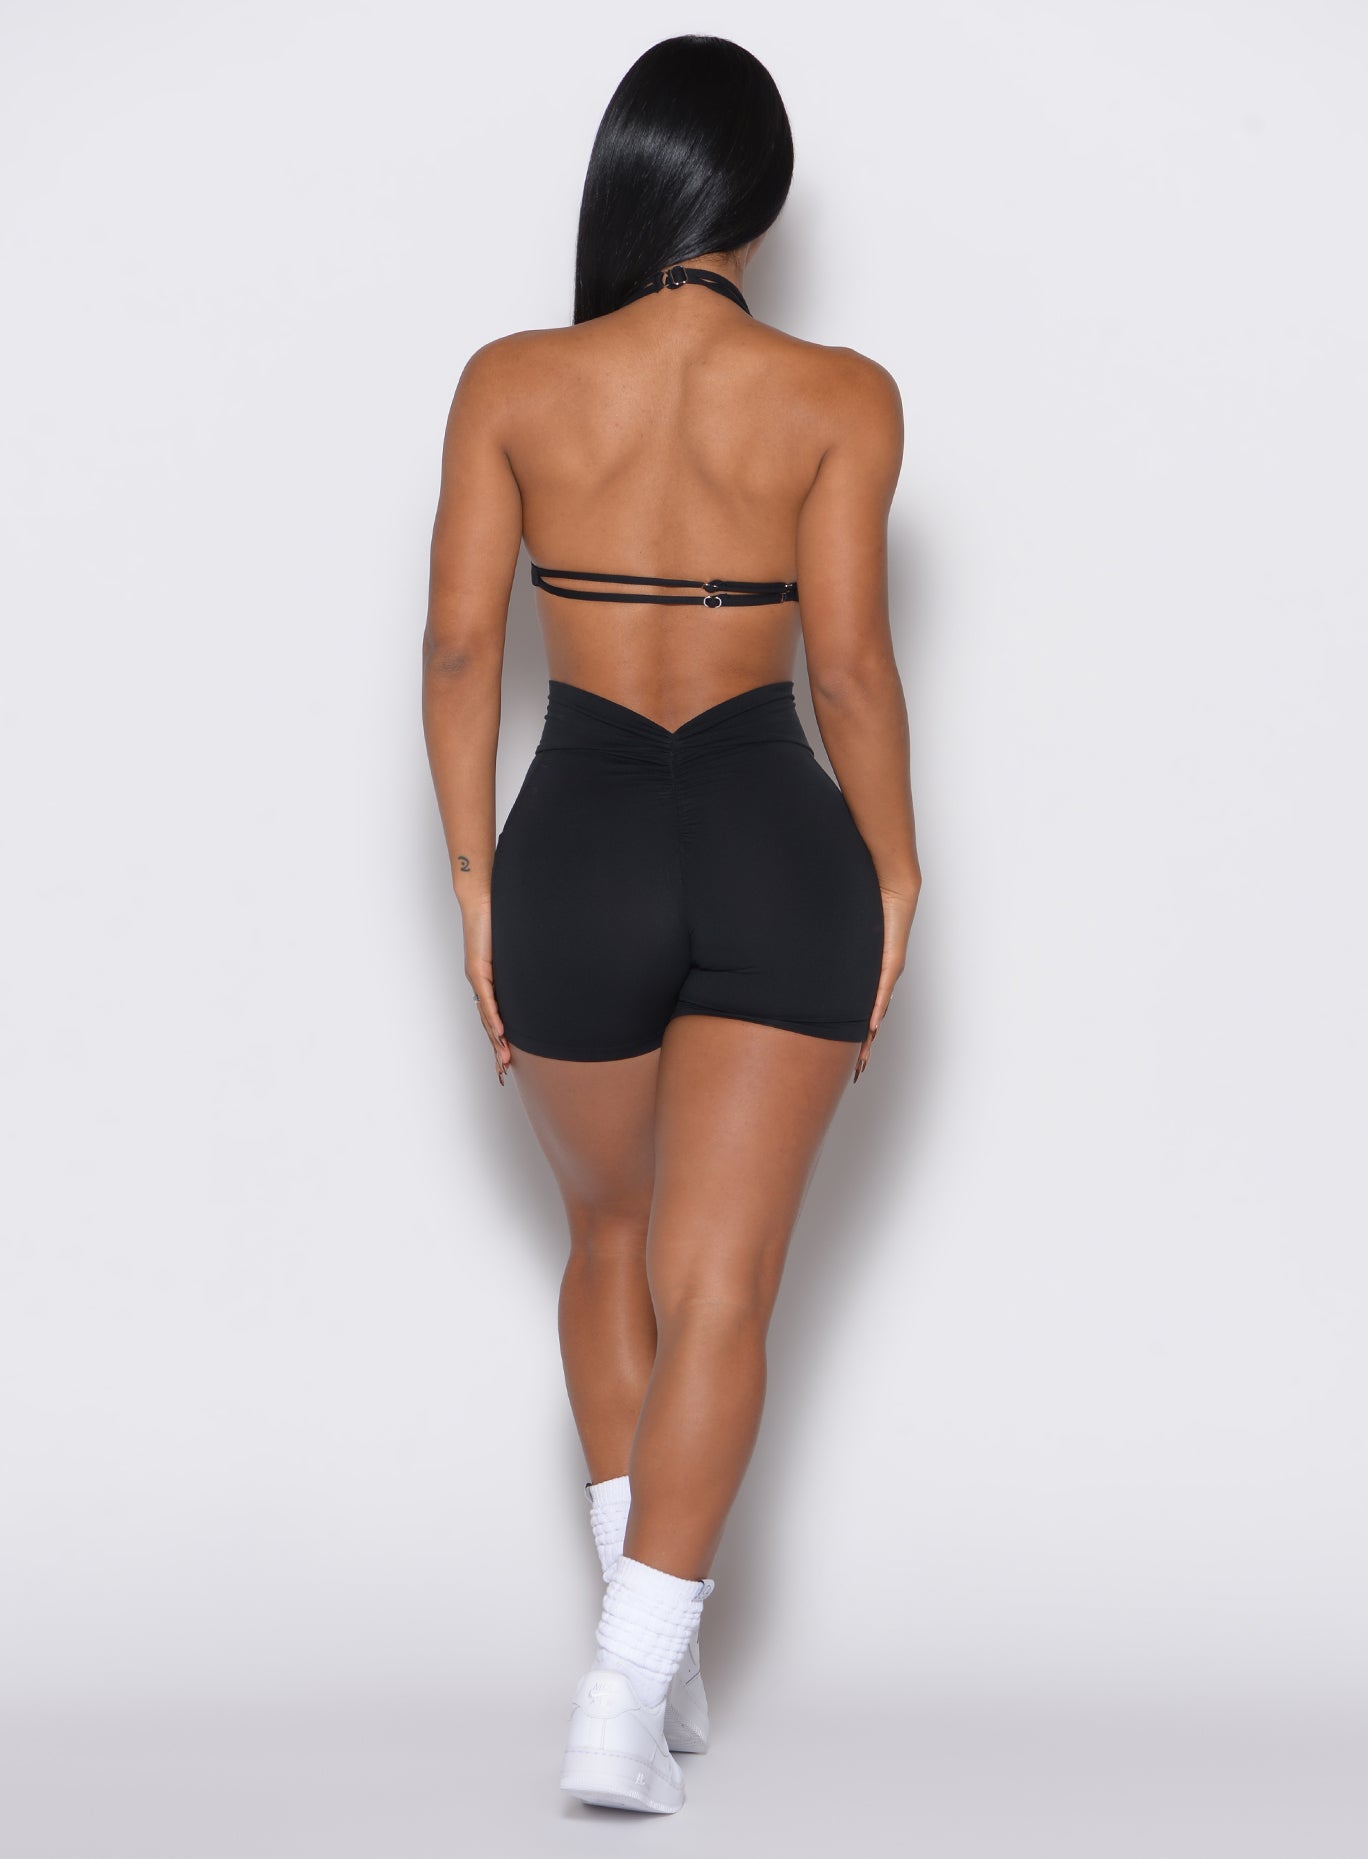 back profile view of a model wearing our black V back shorts along with the matching sports bra